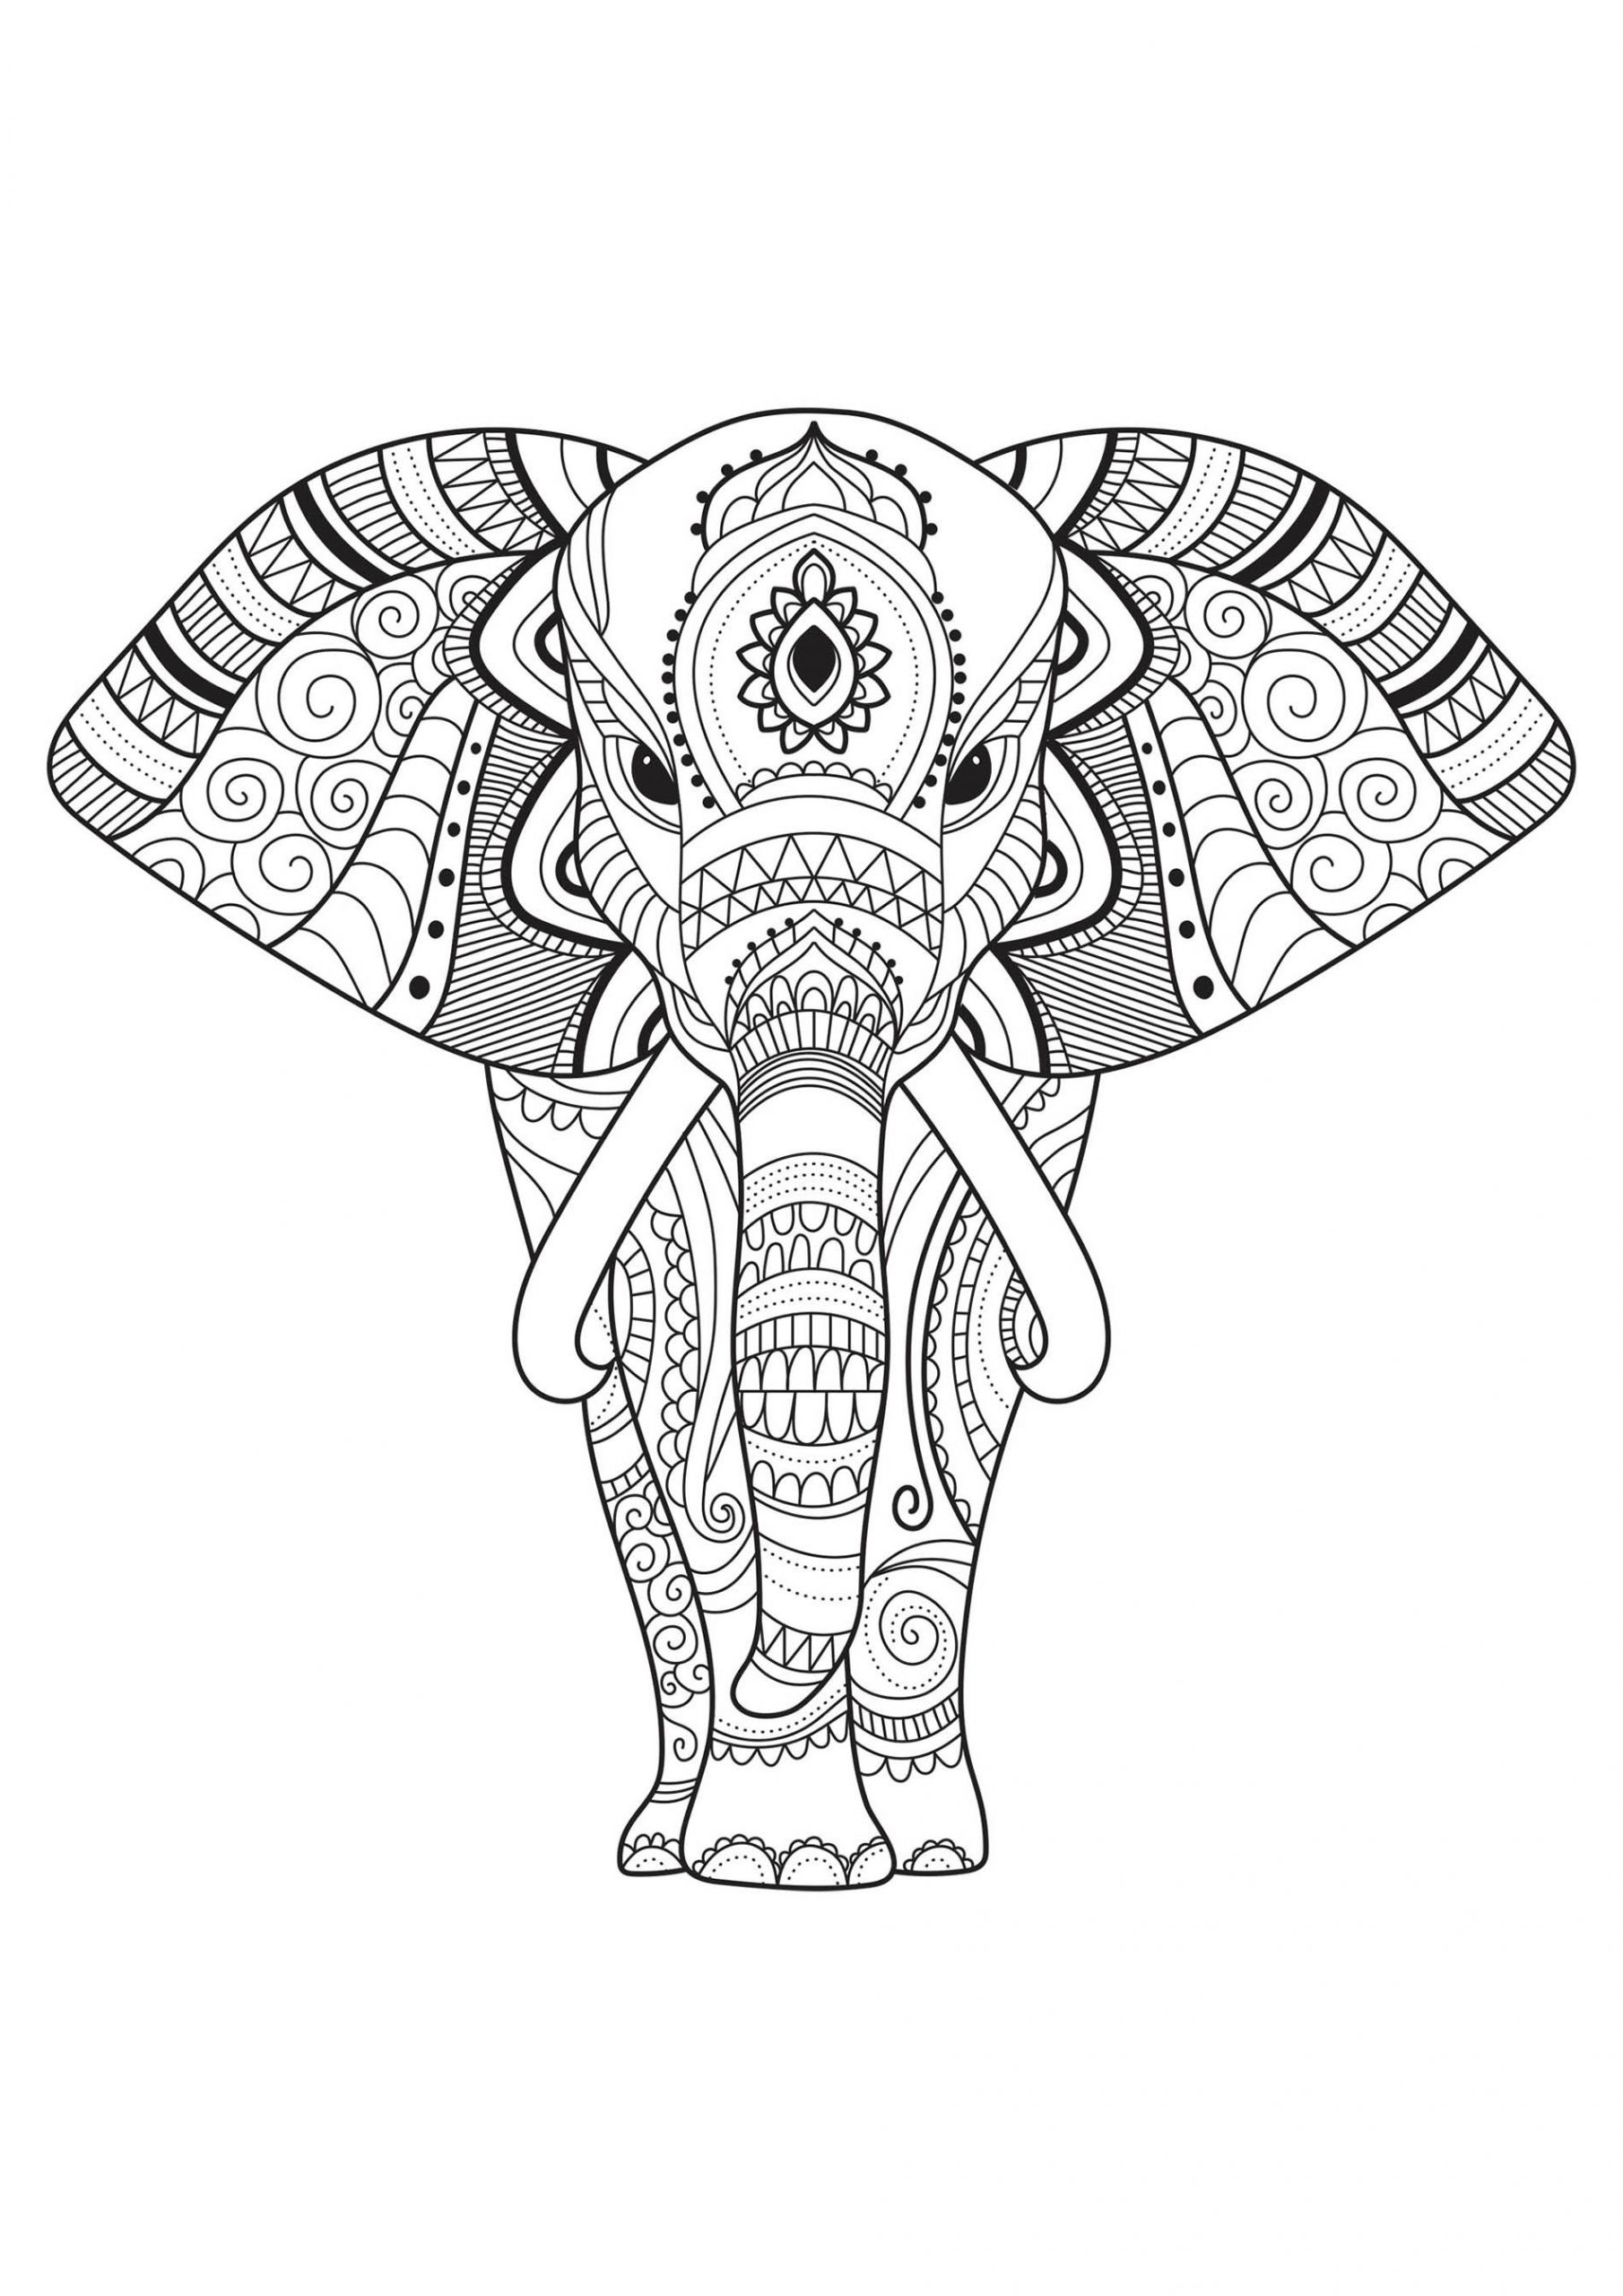 Elephant Adult Coloring Pages
 Elephants to color for children Elephants Kids Coloring